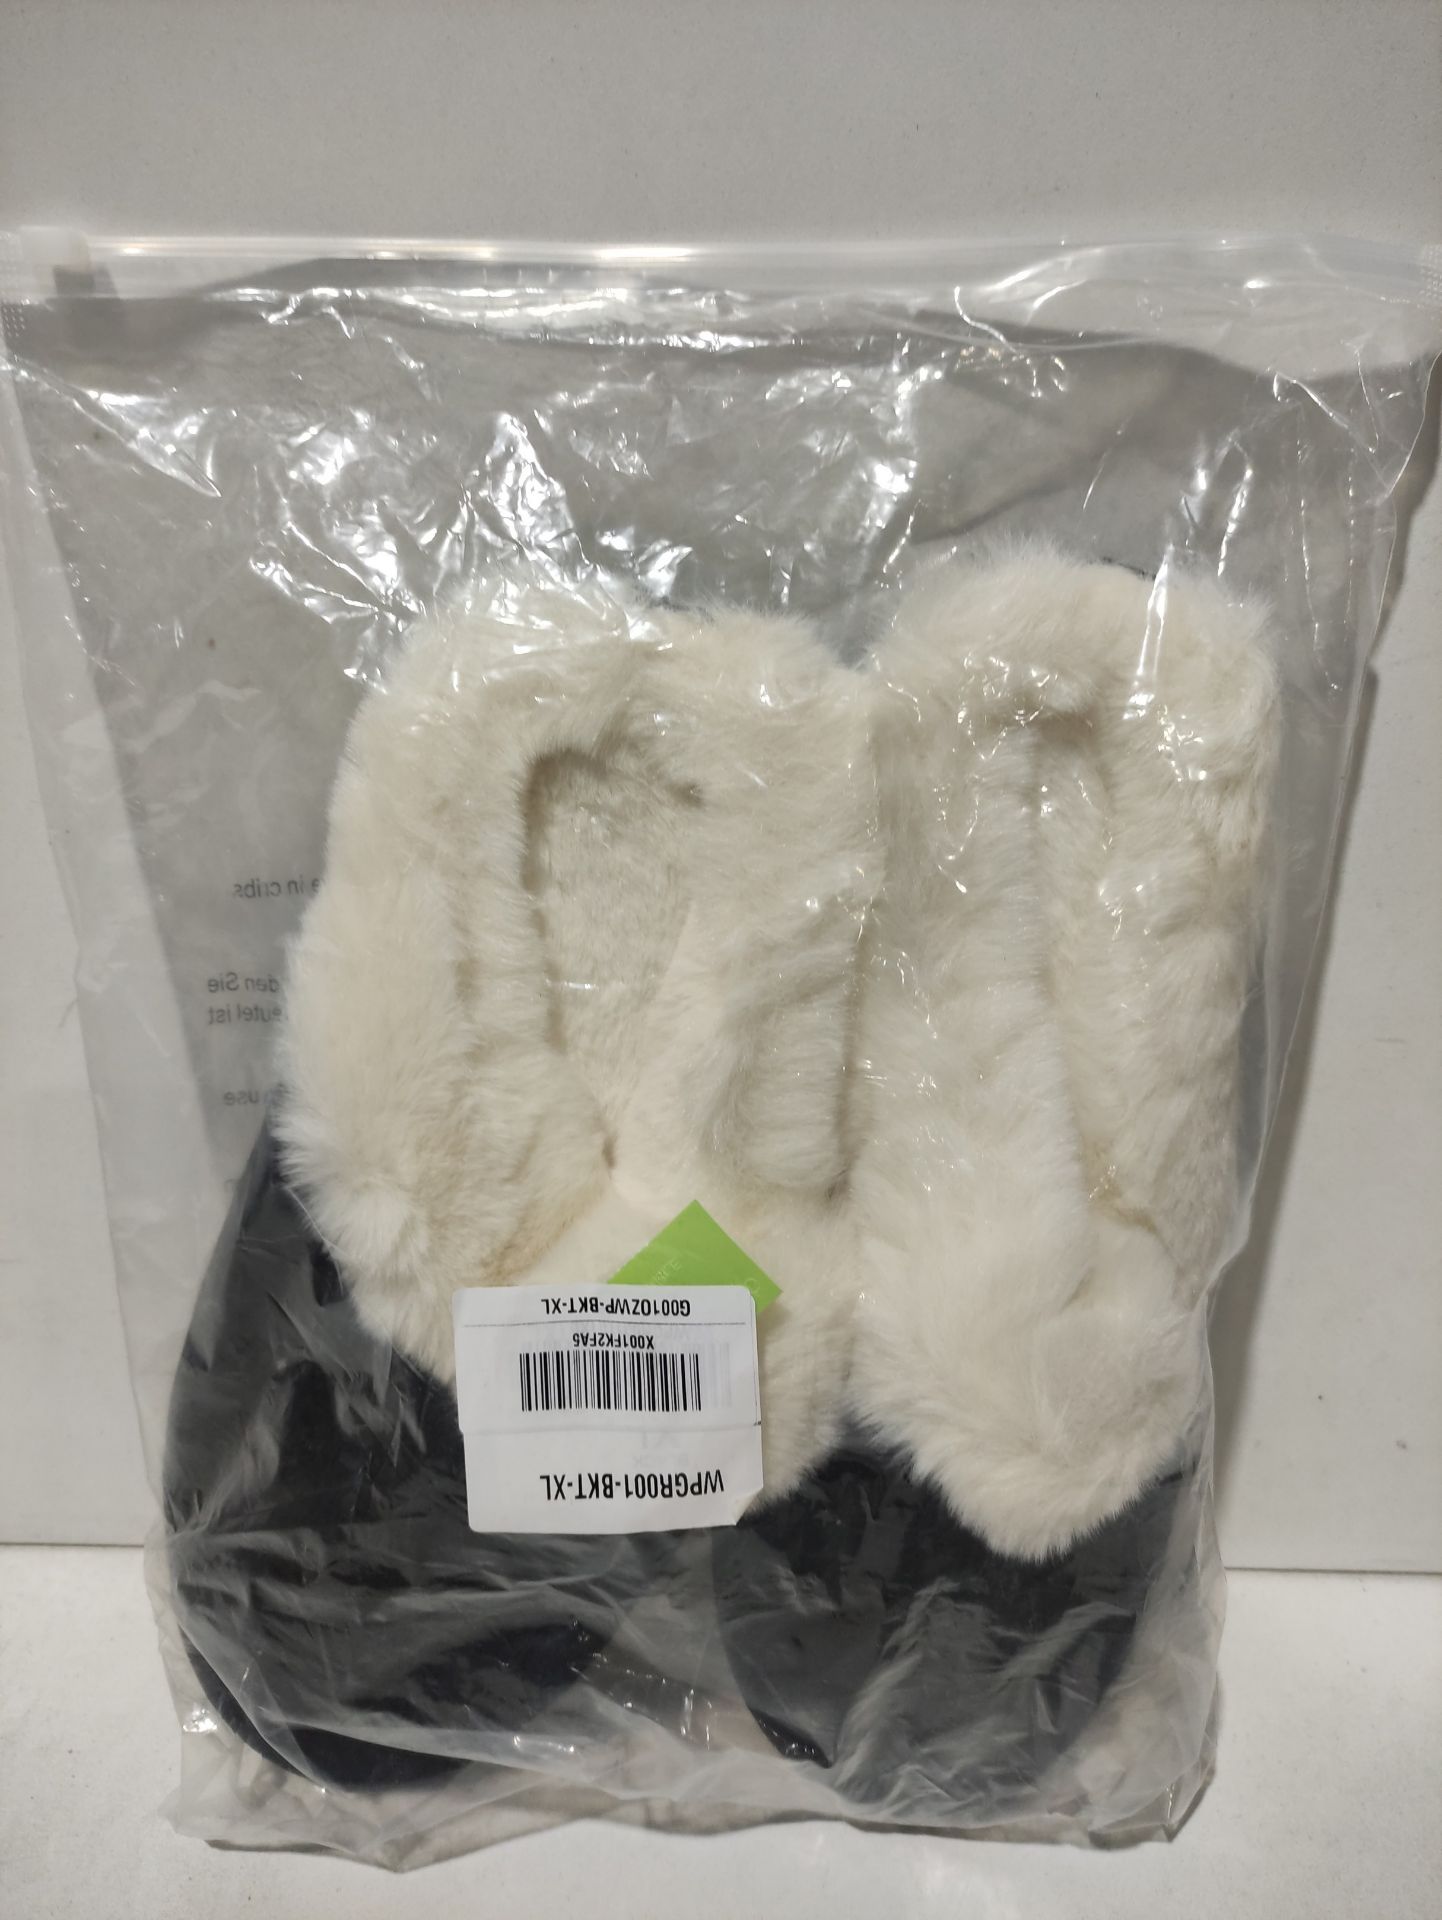 RRP £16.74 BRAND NEW STOCK Greatonu Slippers for Women Fuzzy House Slippers Comfy - Image 2 of 2